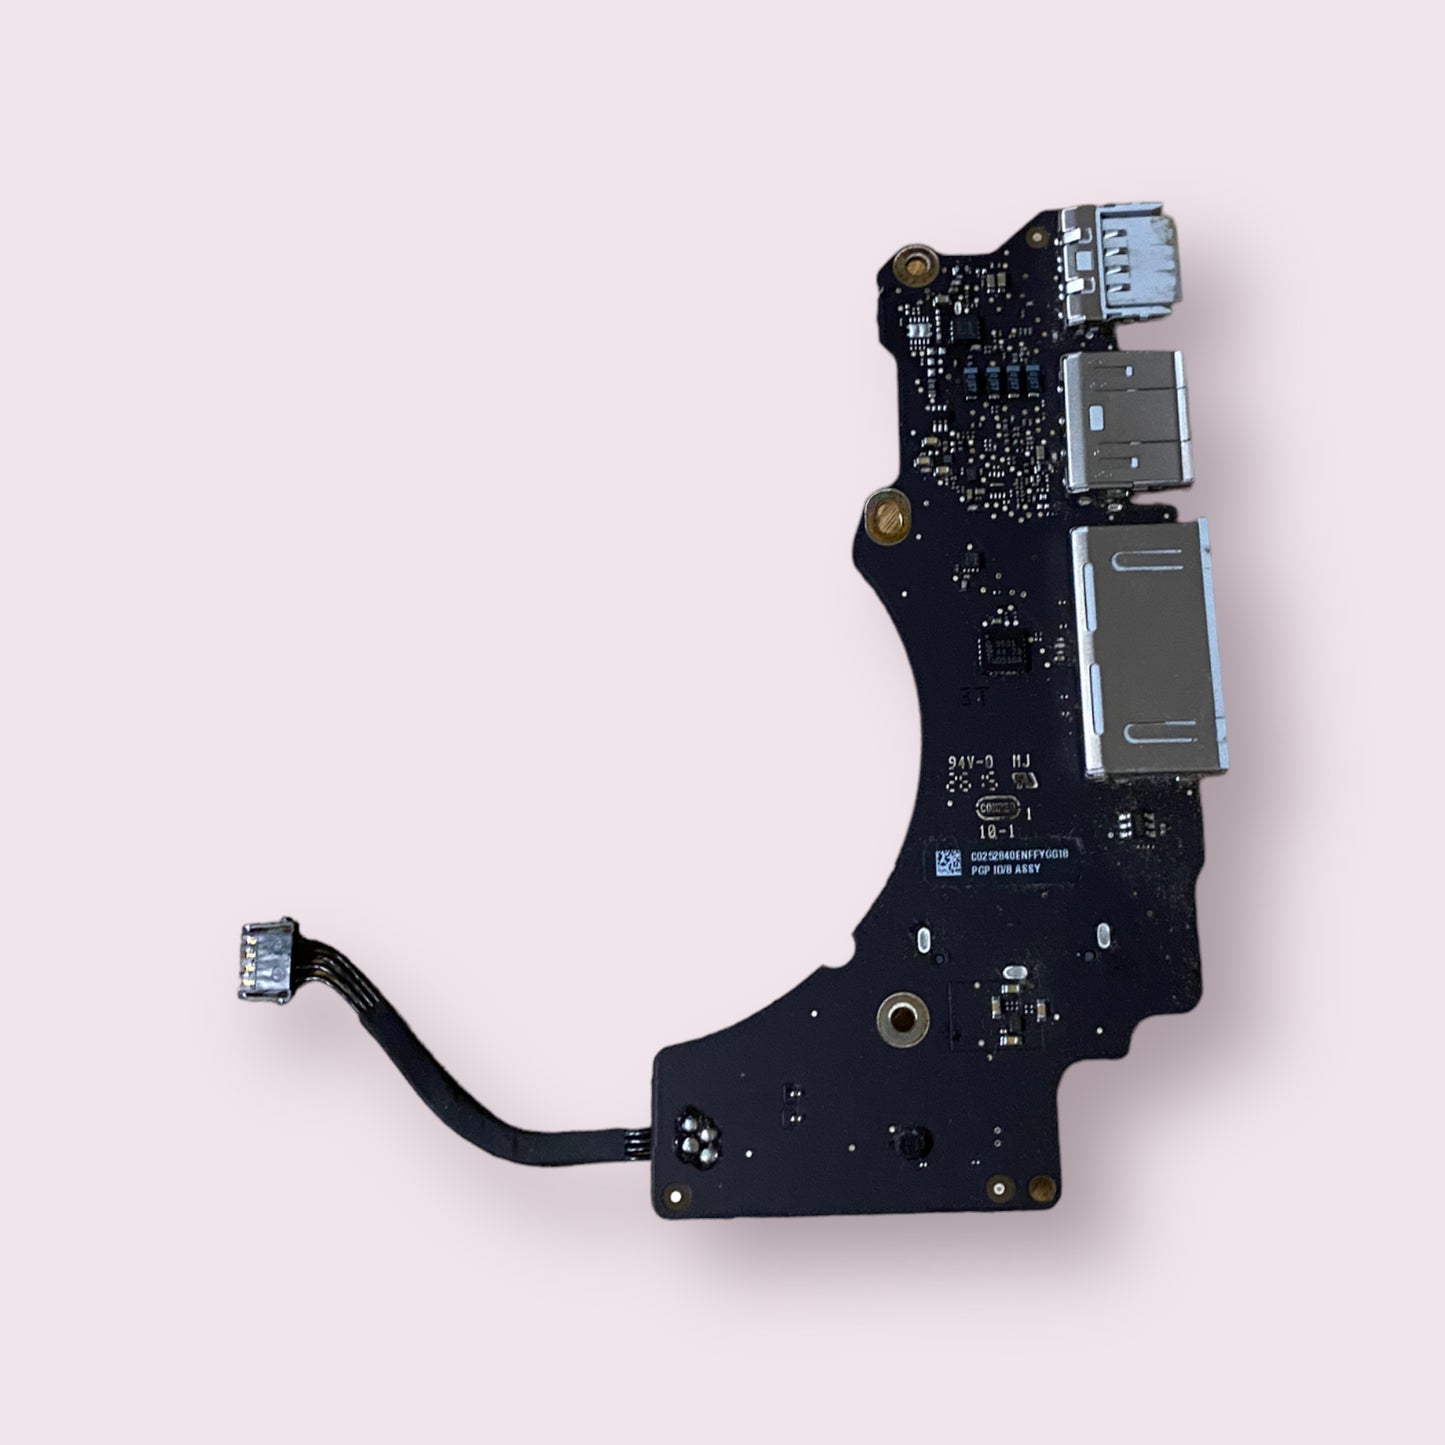 MacBook Pro 13" Early 2015 A1502 Sub USB HDMI Daughter Board 820-00012 - Genuine Pull Part